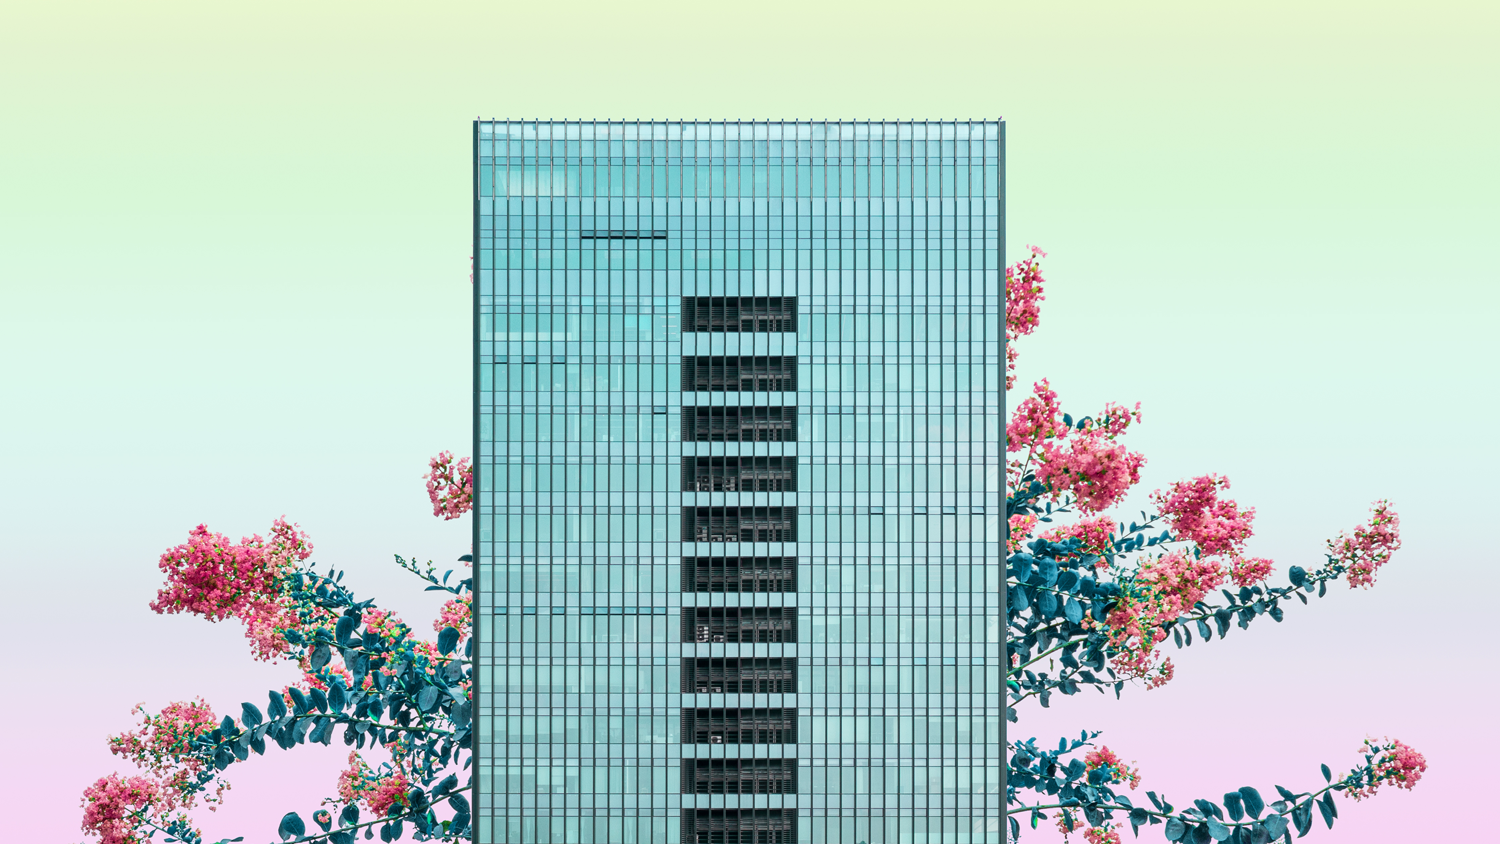 highly saturated image depicting the juxtaposition between urban architecture and nature